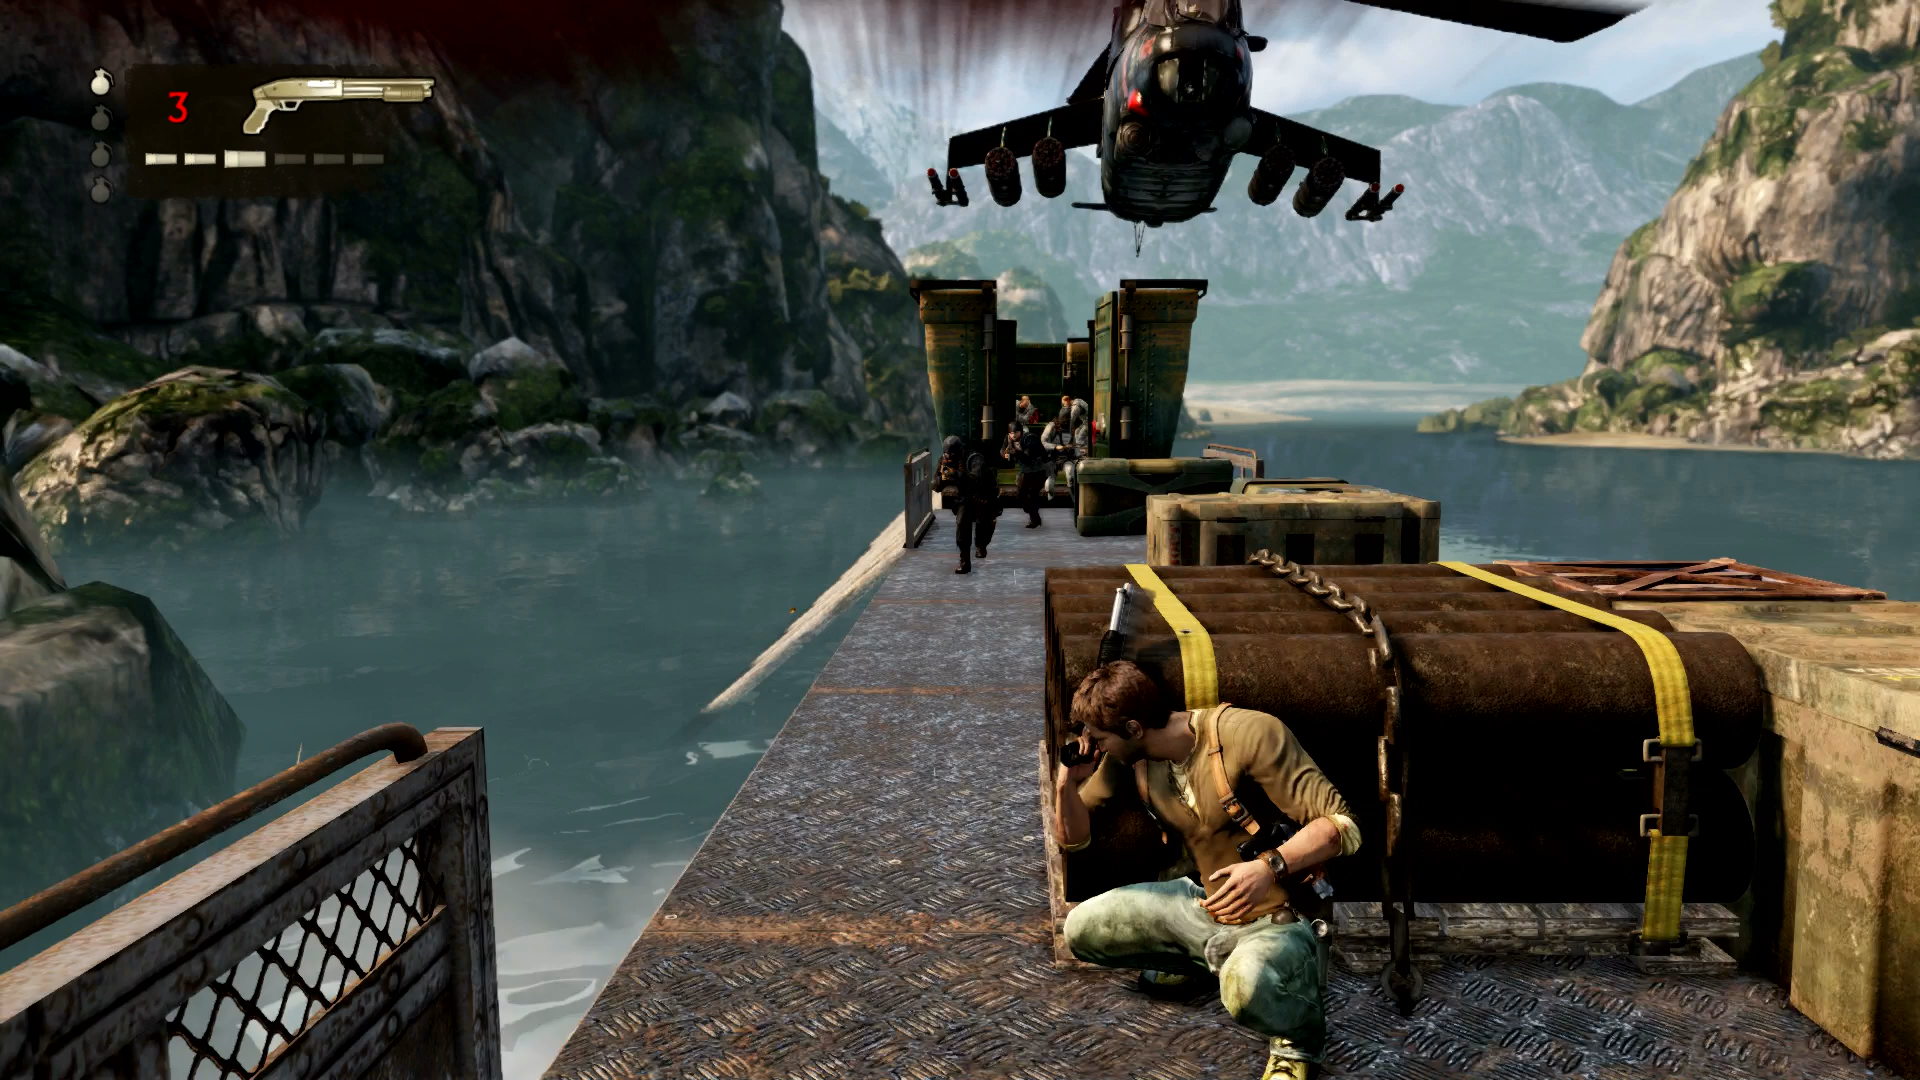 uncharted 2 pc game full